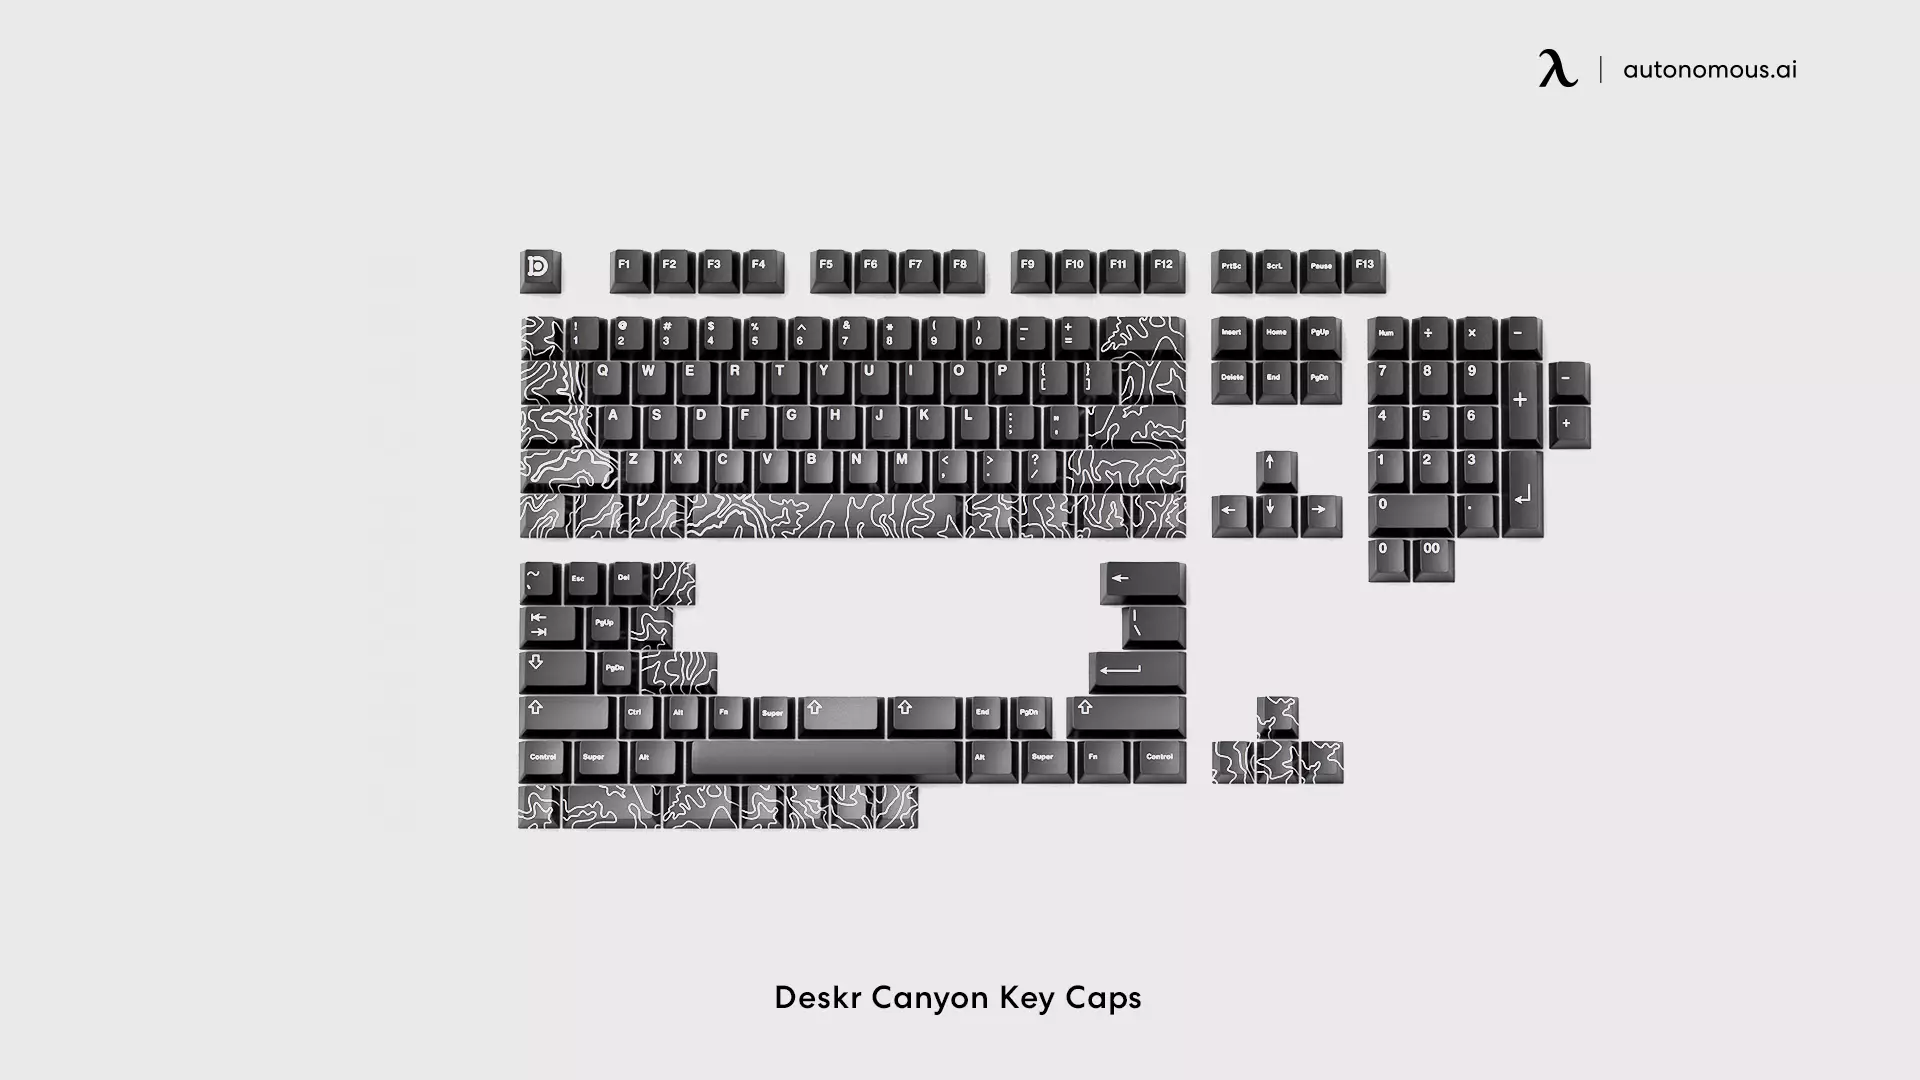 Deskr Canyon Caps for Gaming Keyboards